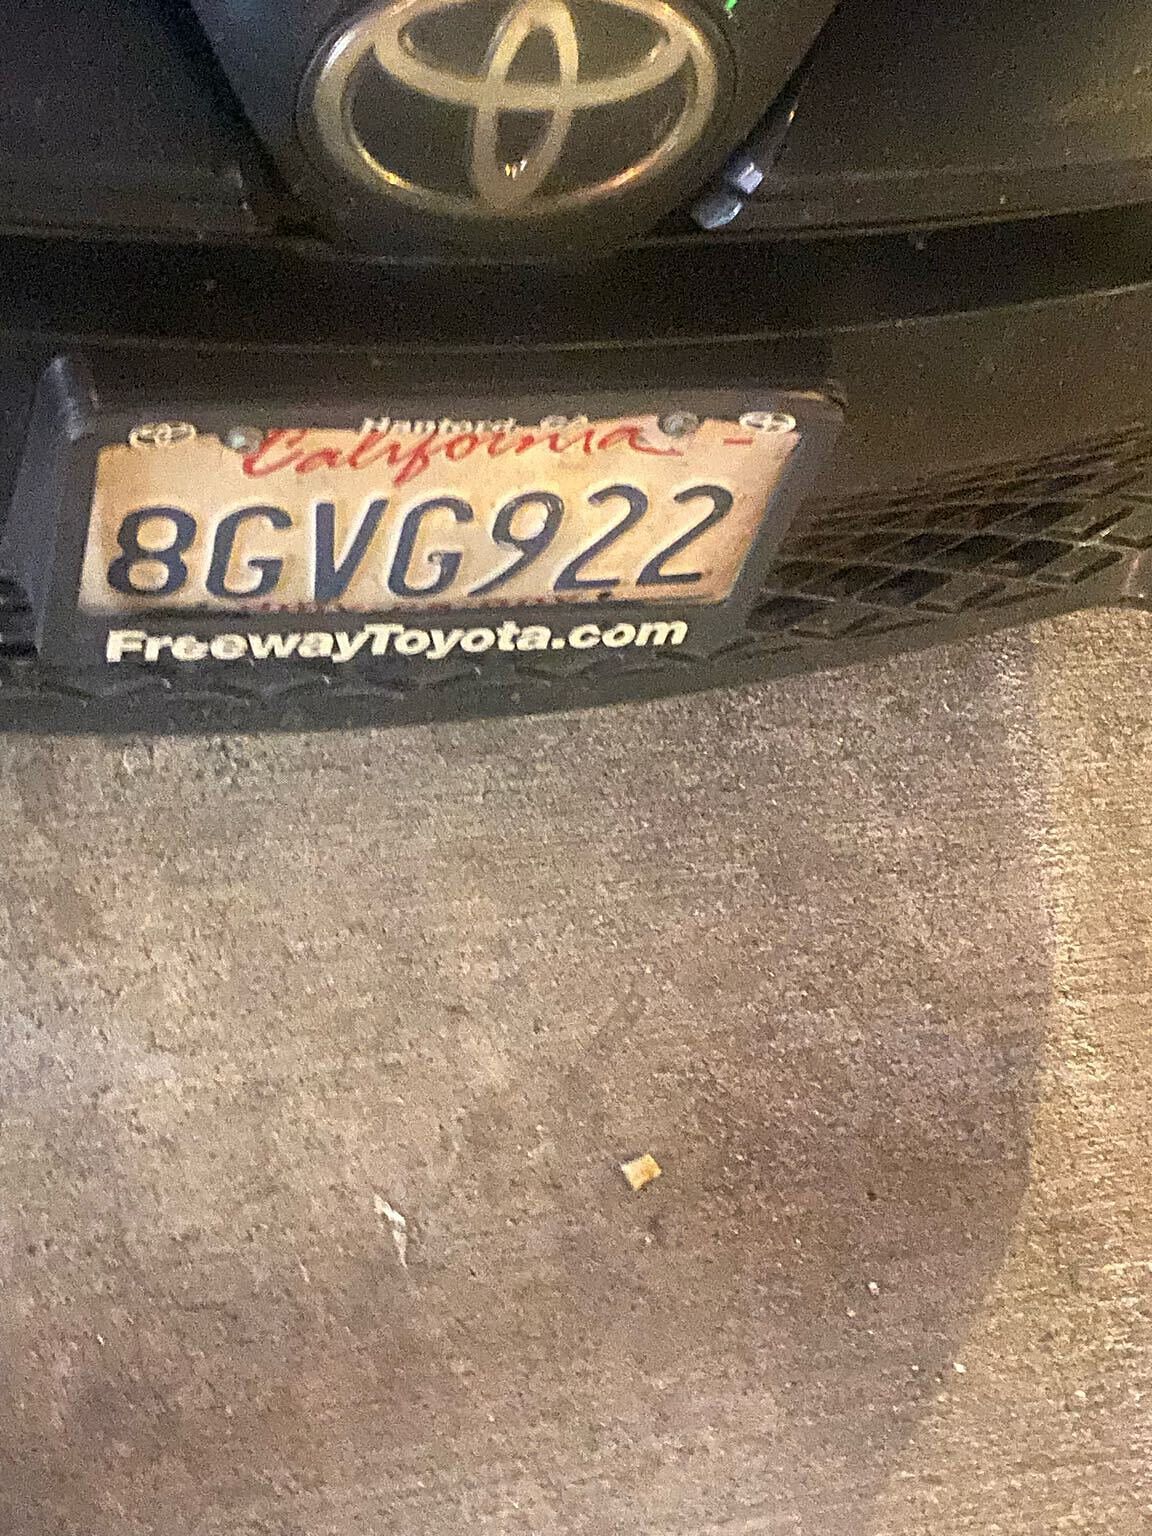 Photo of car in the street with license plate 8GVG922 in California